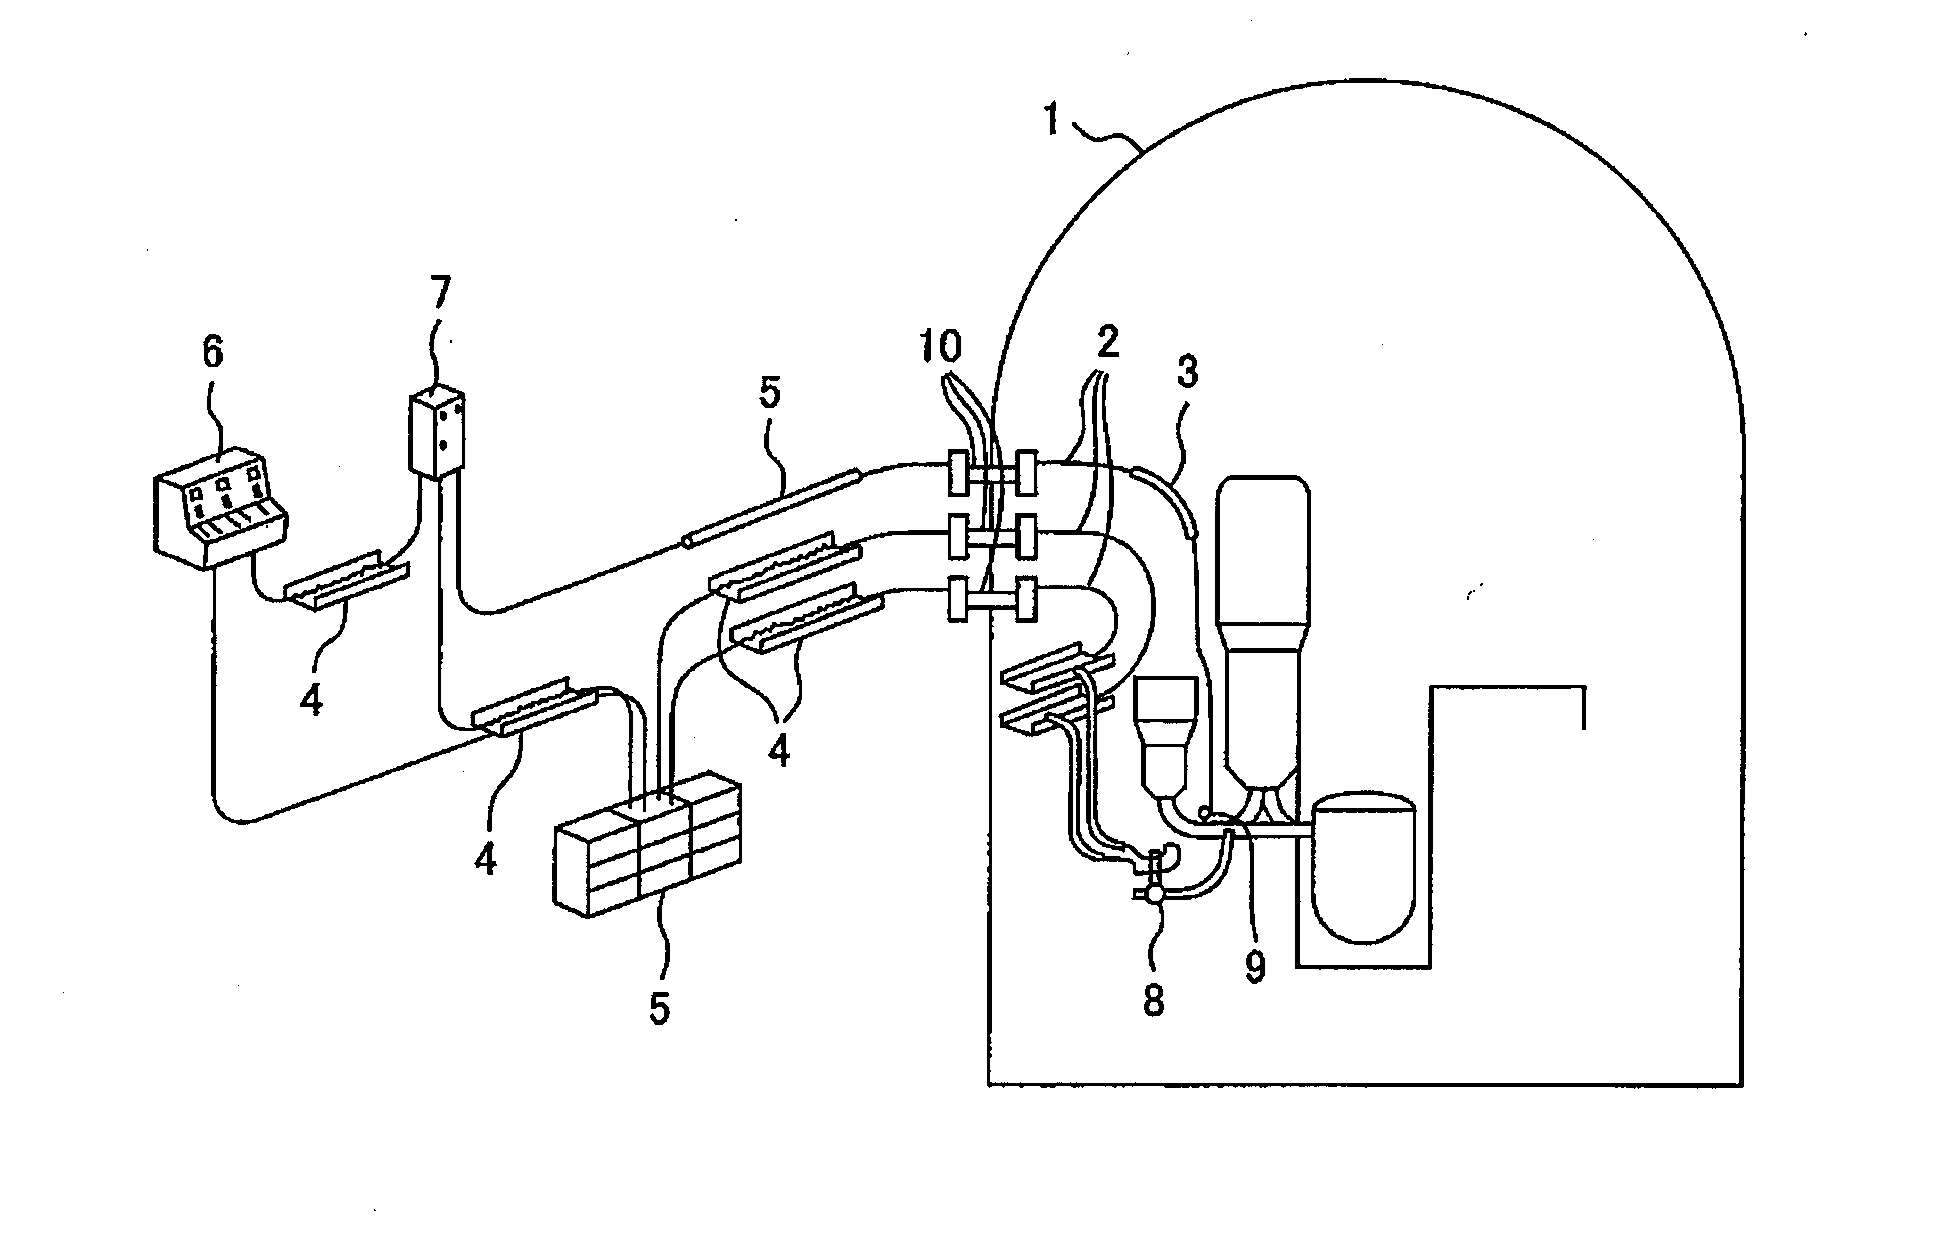 Method for Evaluating Life of Cable Insulating Coating Material